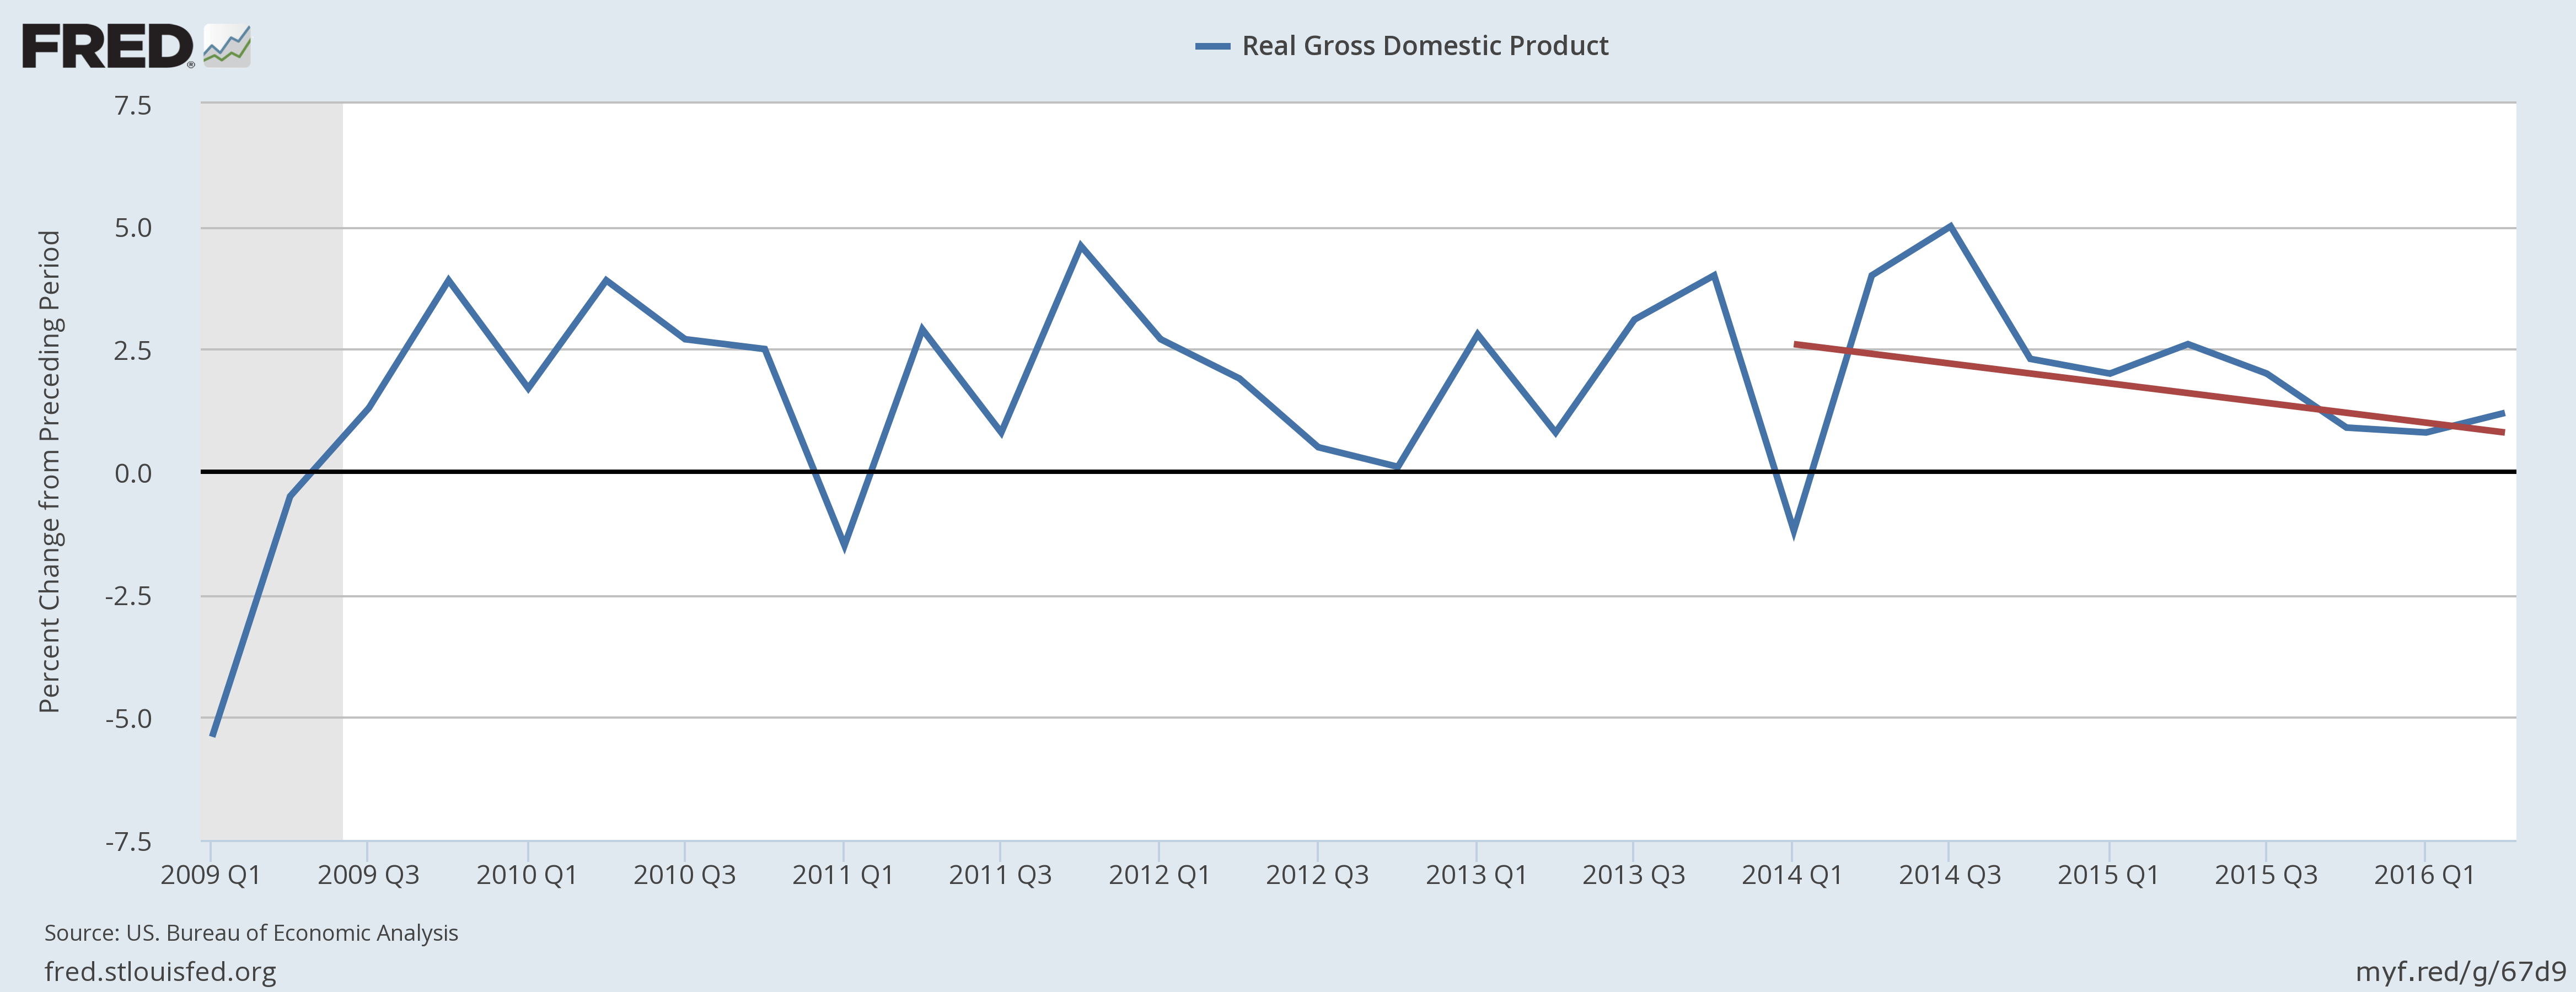 US real GDP growth from Q1 2009 to Q2 2016